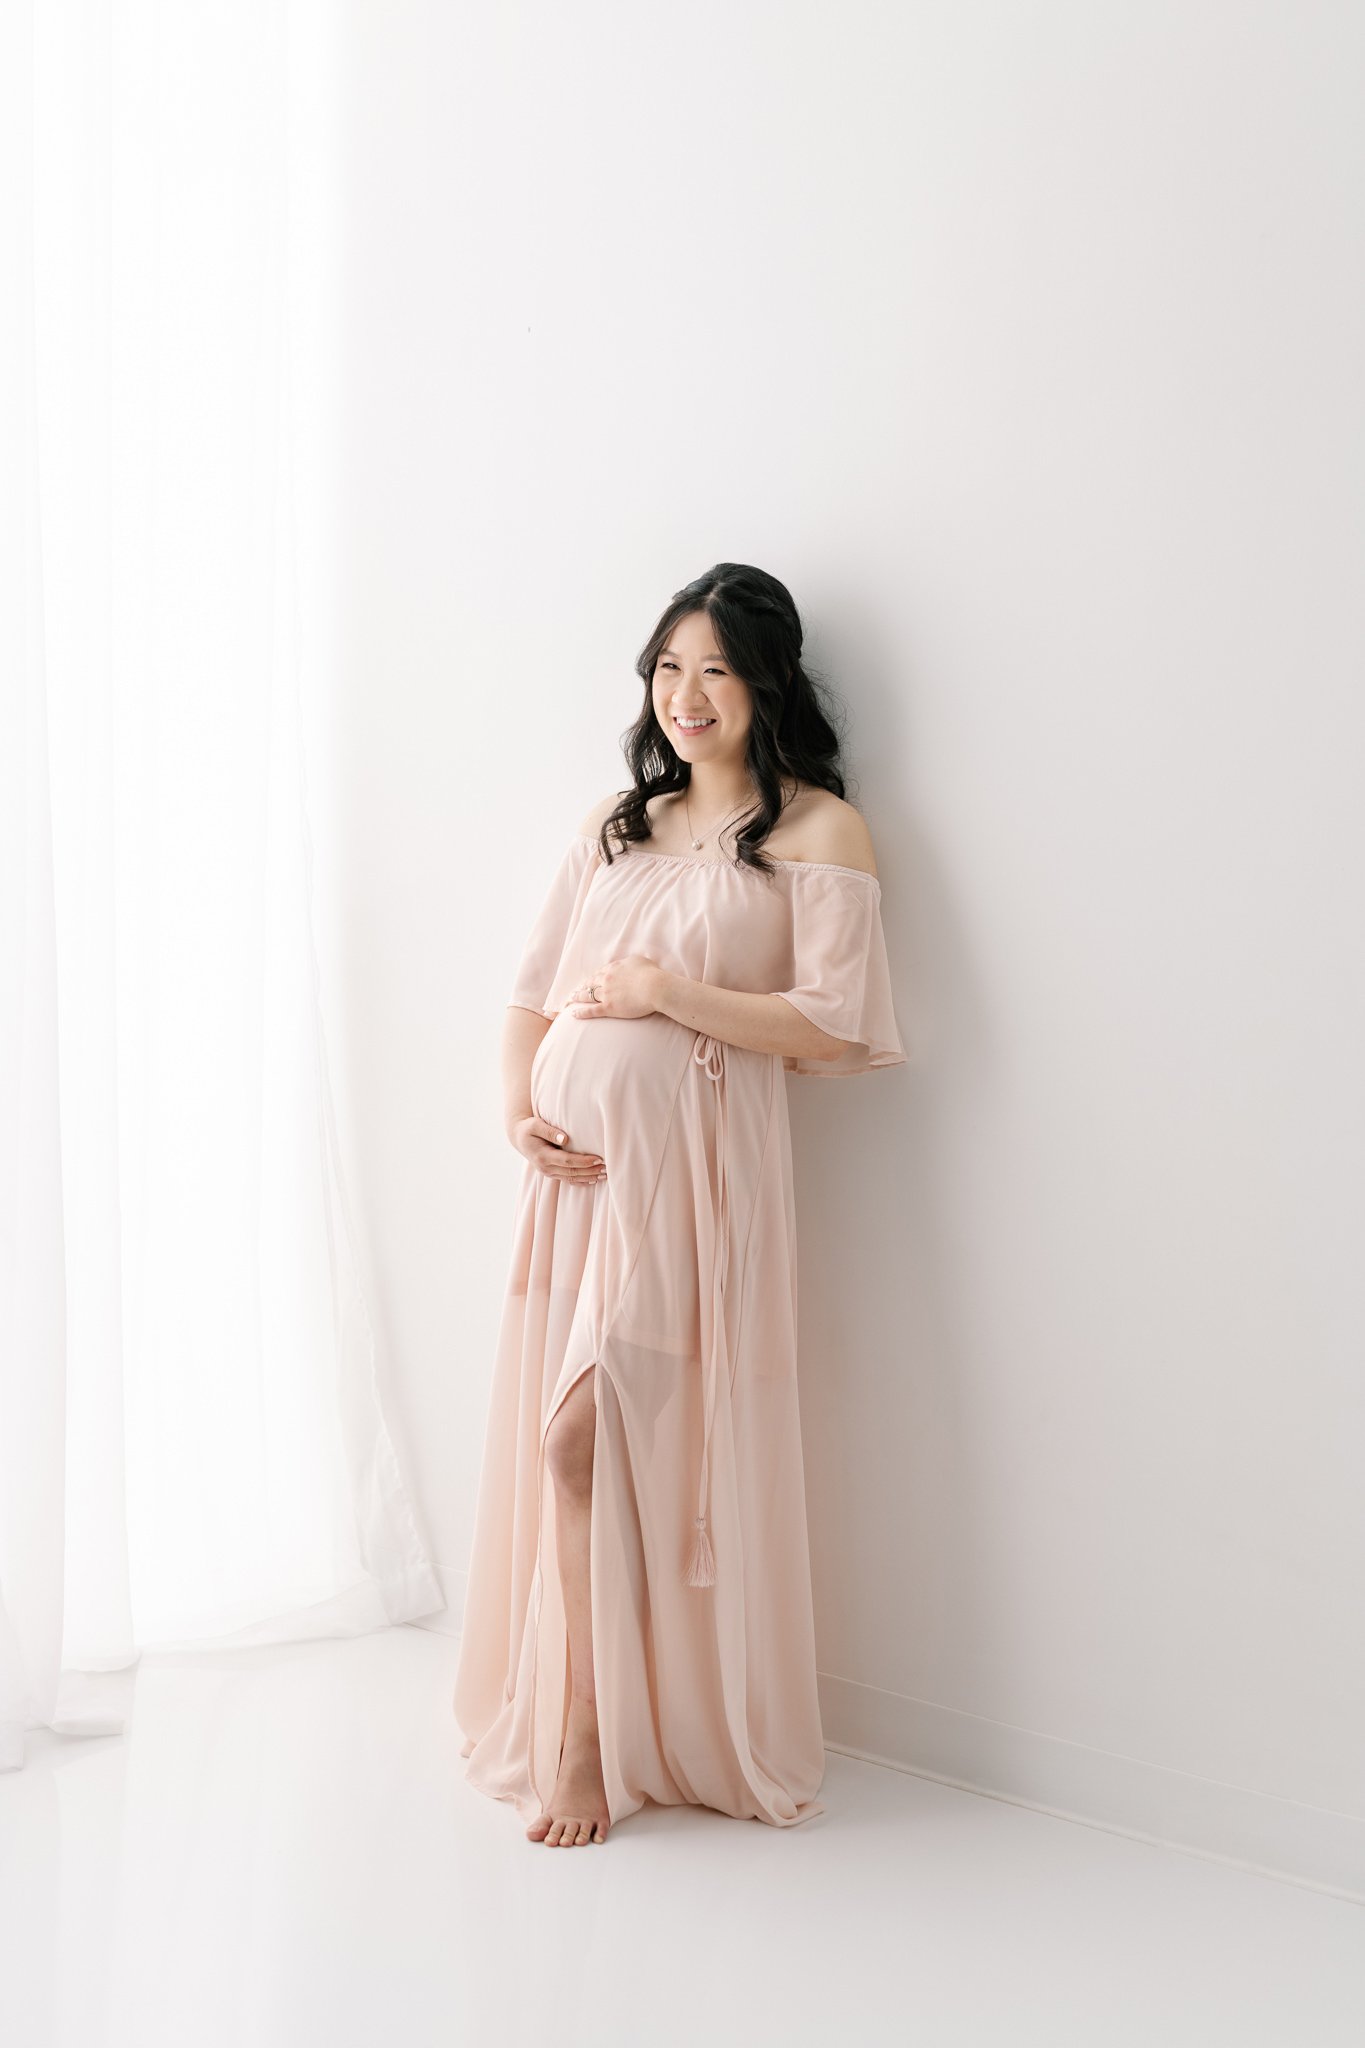  All-white studio maternity session for a modern maternity session portrait vibe by Nicole Hawkins Photography. modern maternity portraits pink gown white background #NicoleHawkinsPhotography #NicoleHawkinsMaternity #MaternityPhotography #Maternityst